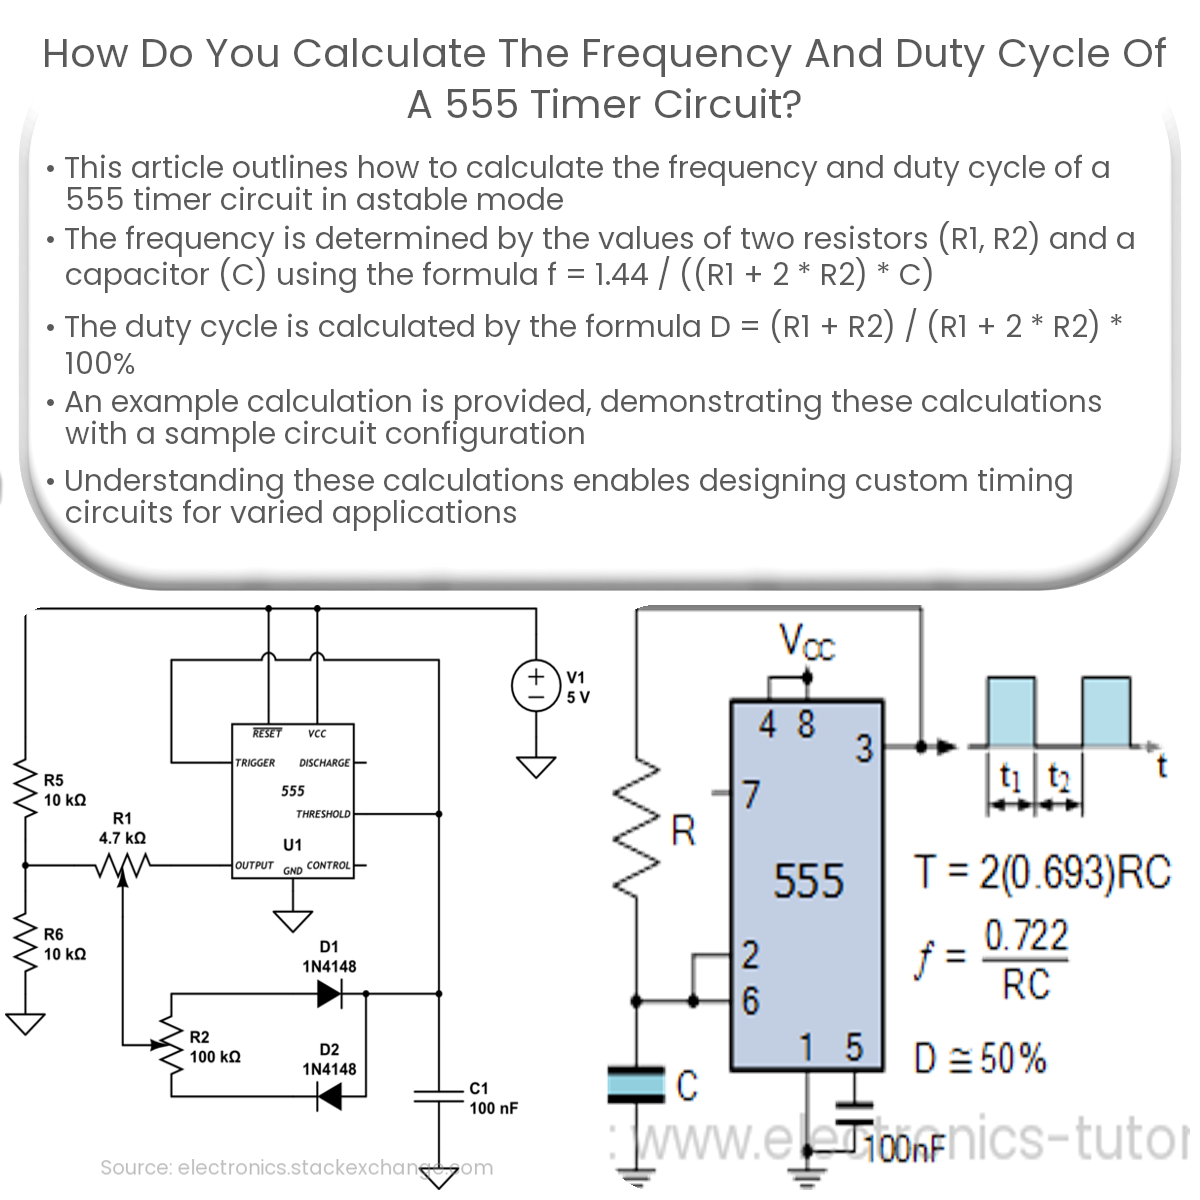 How do you calculate the frequency and duty cycle of a 555 timer circuit?